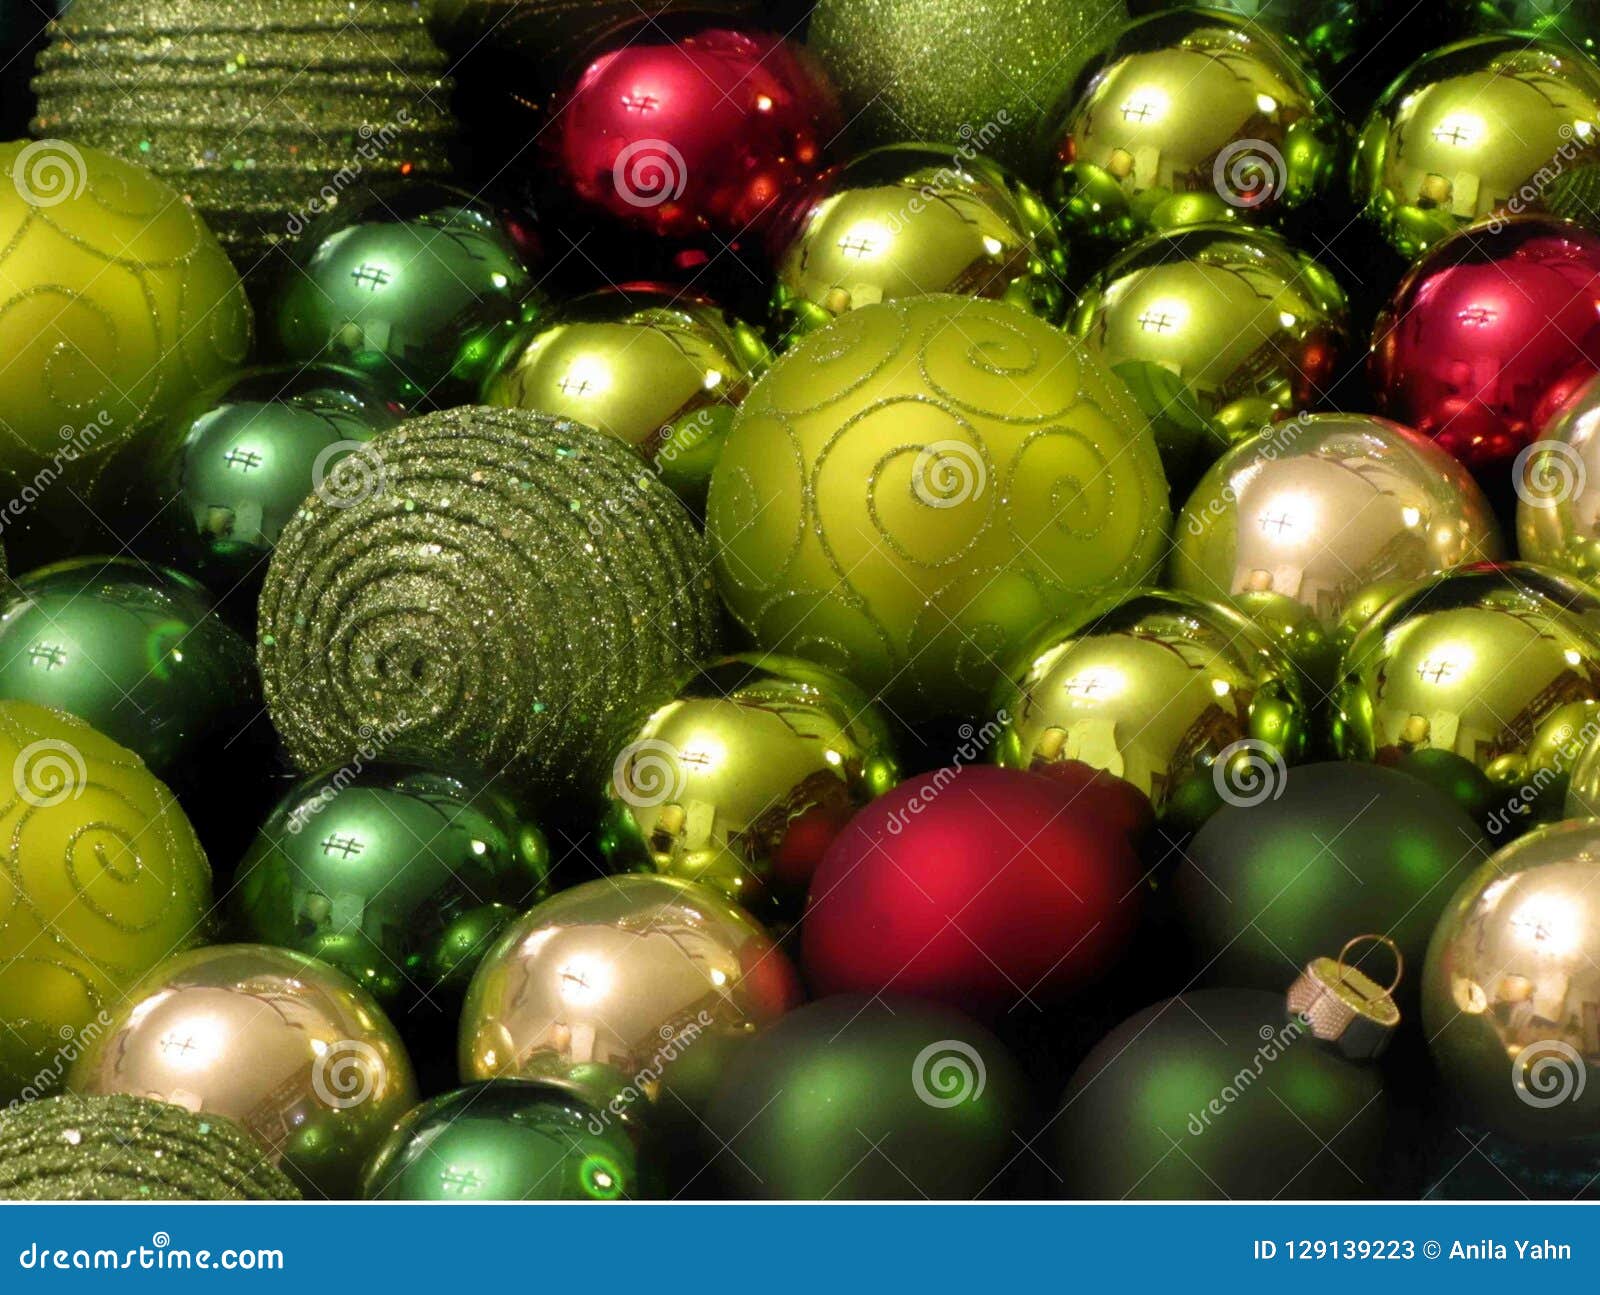 Attractive Christmas Balls stock image. Image of decorative - 129139223